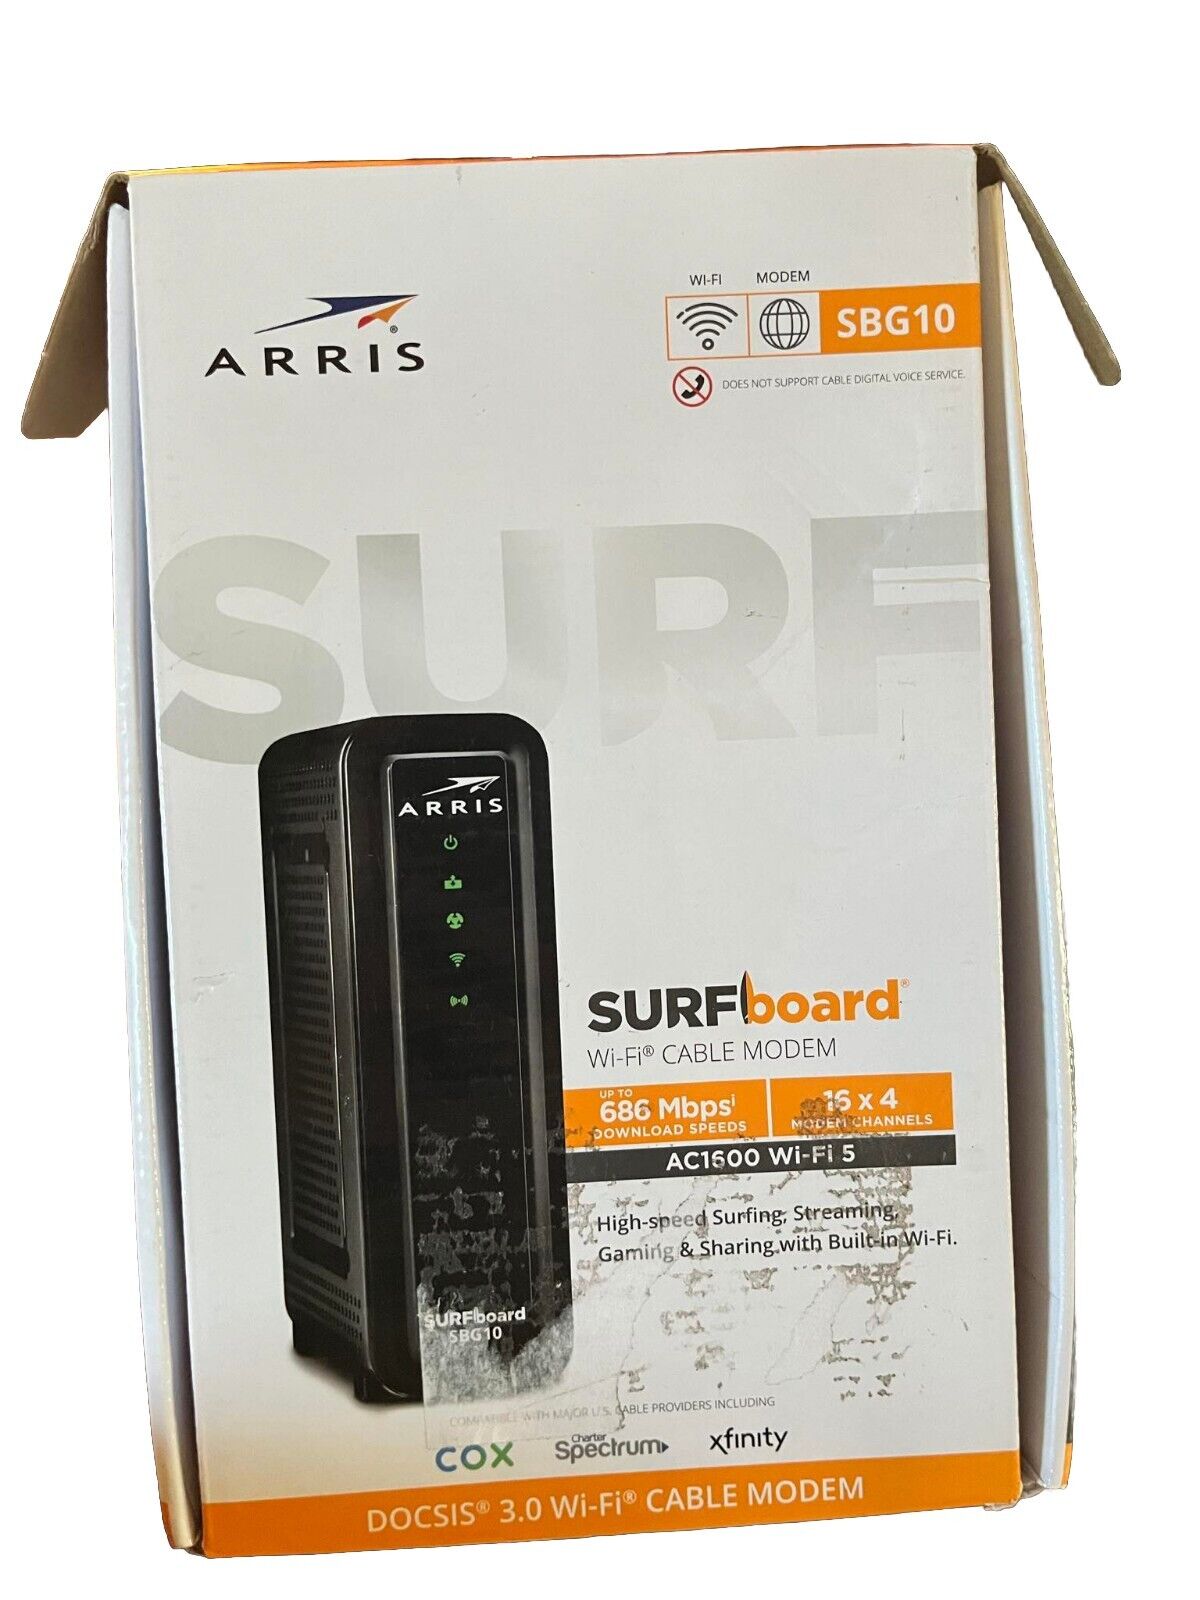 ARRIS SBG10 SURFboard  AC1600 Dual-Band Cable Modem  Router  ( Still Wrapped)